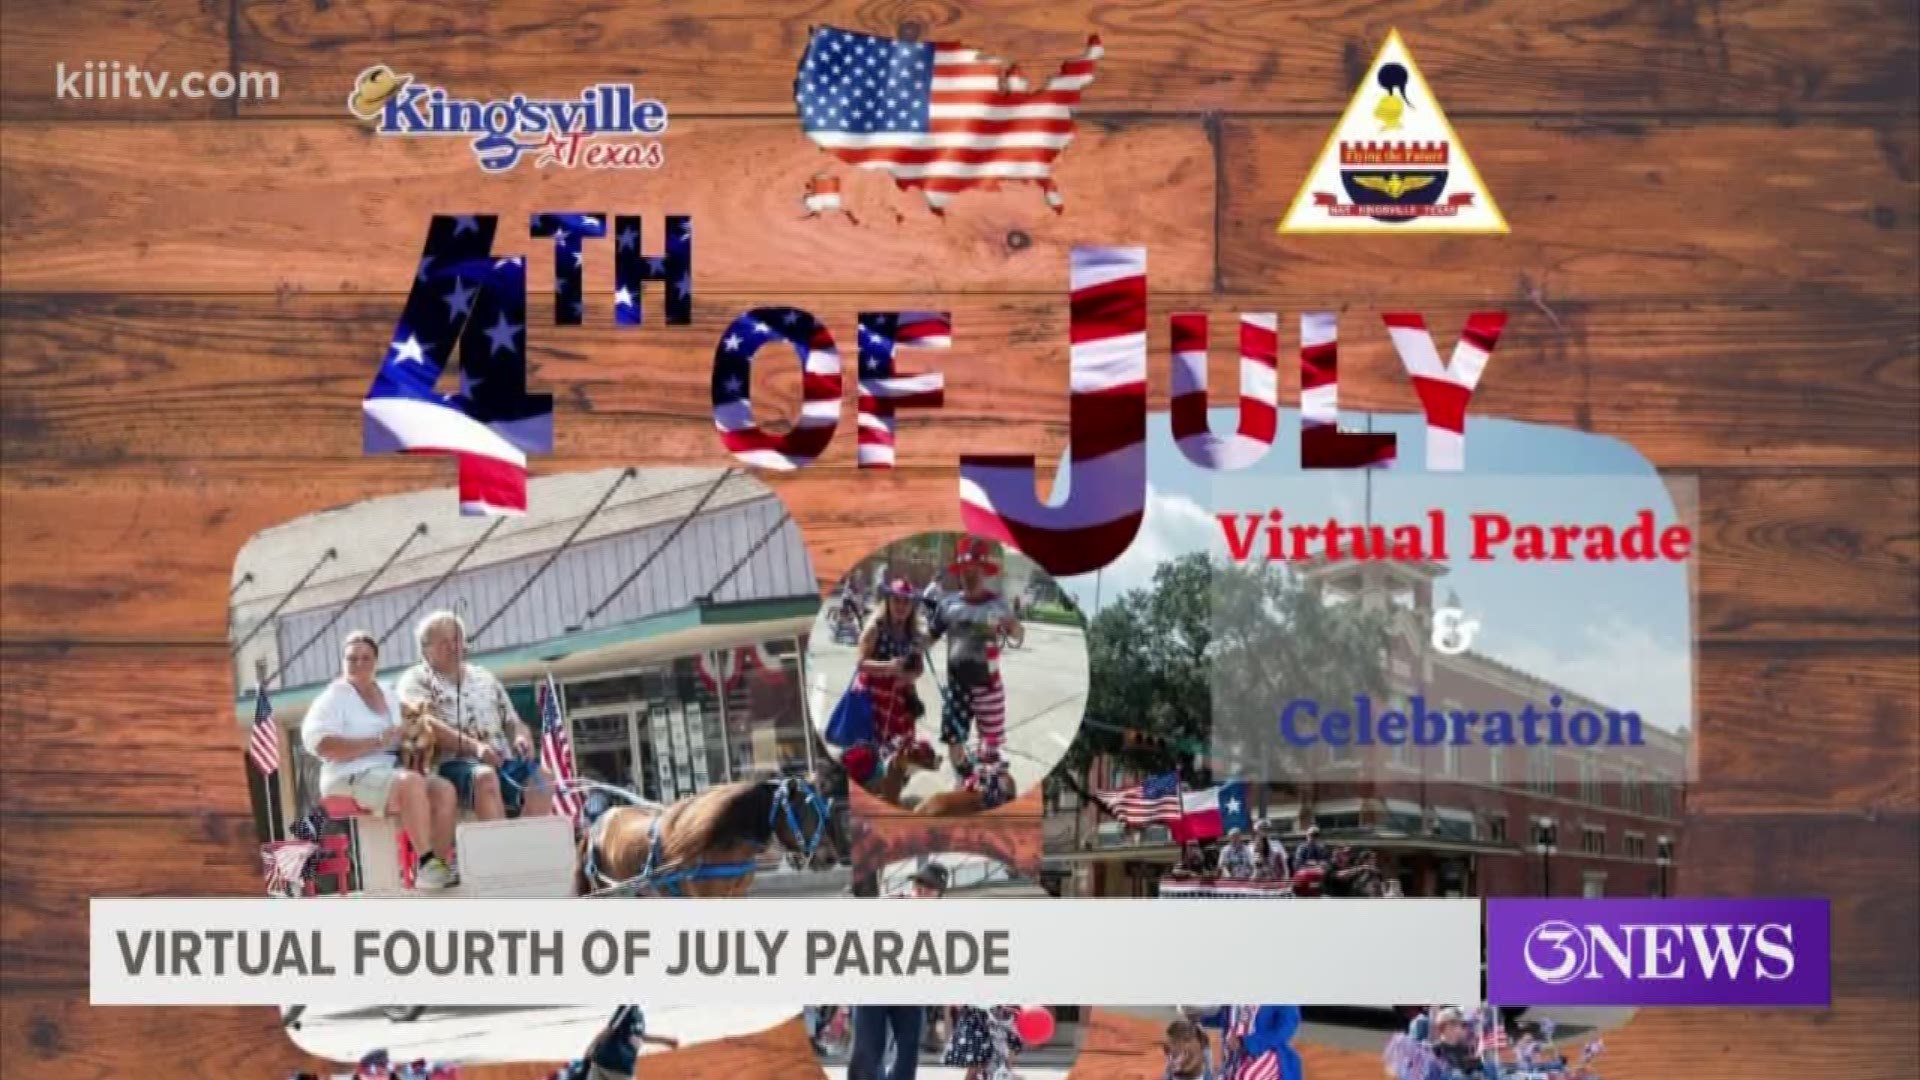 Kingsville’s Fourth of July parade is still happening, but with a